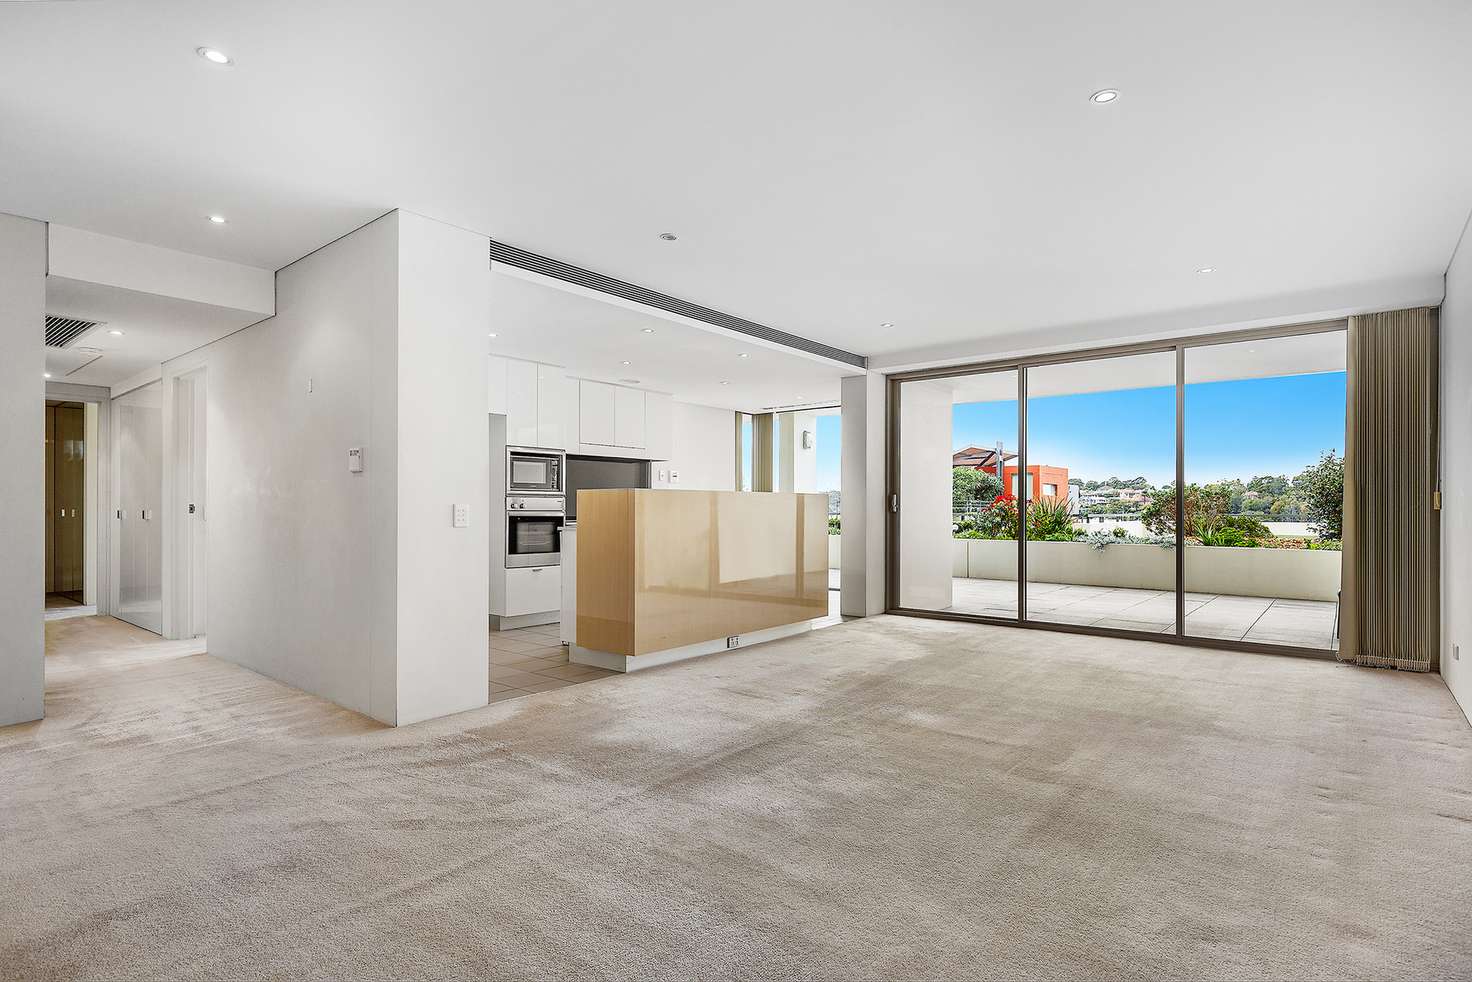 Main view of Homely apartment listing, 66/18 Edgewood Crescent, Cabarita NSW 2137